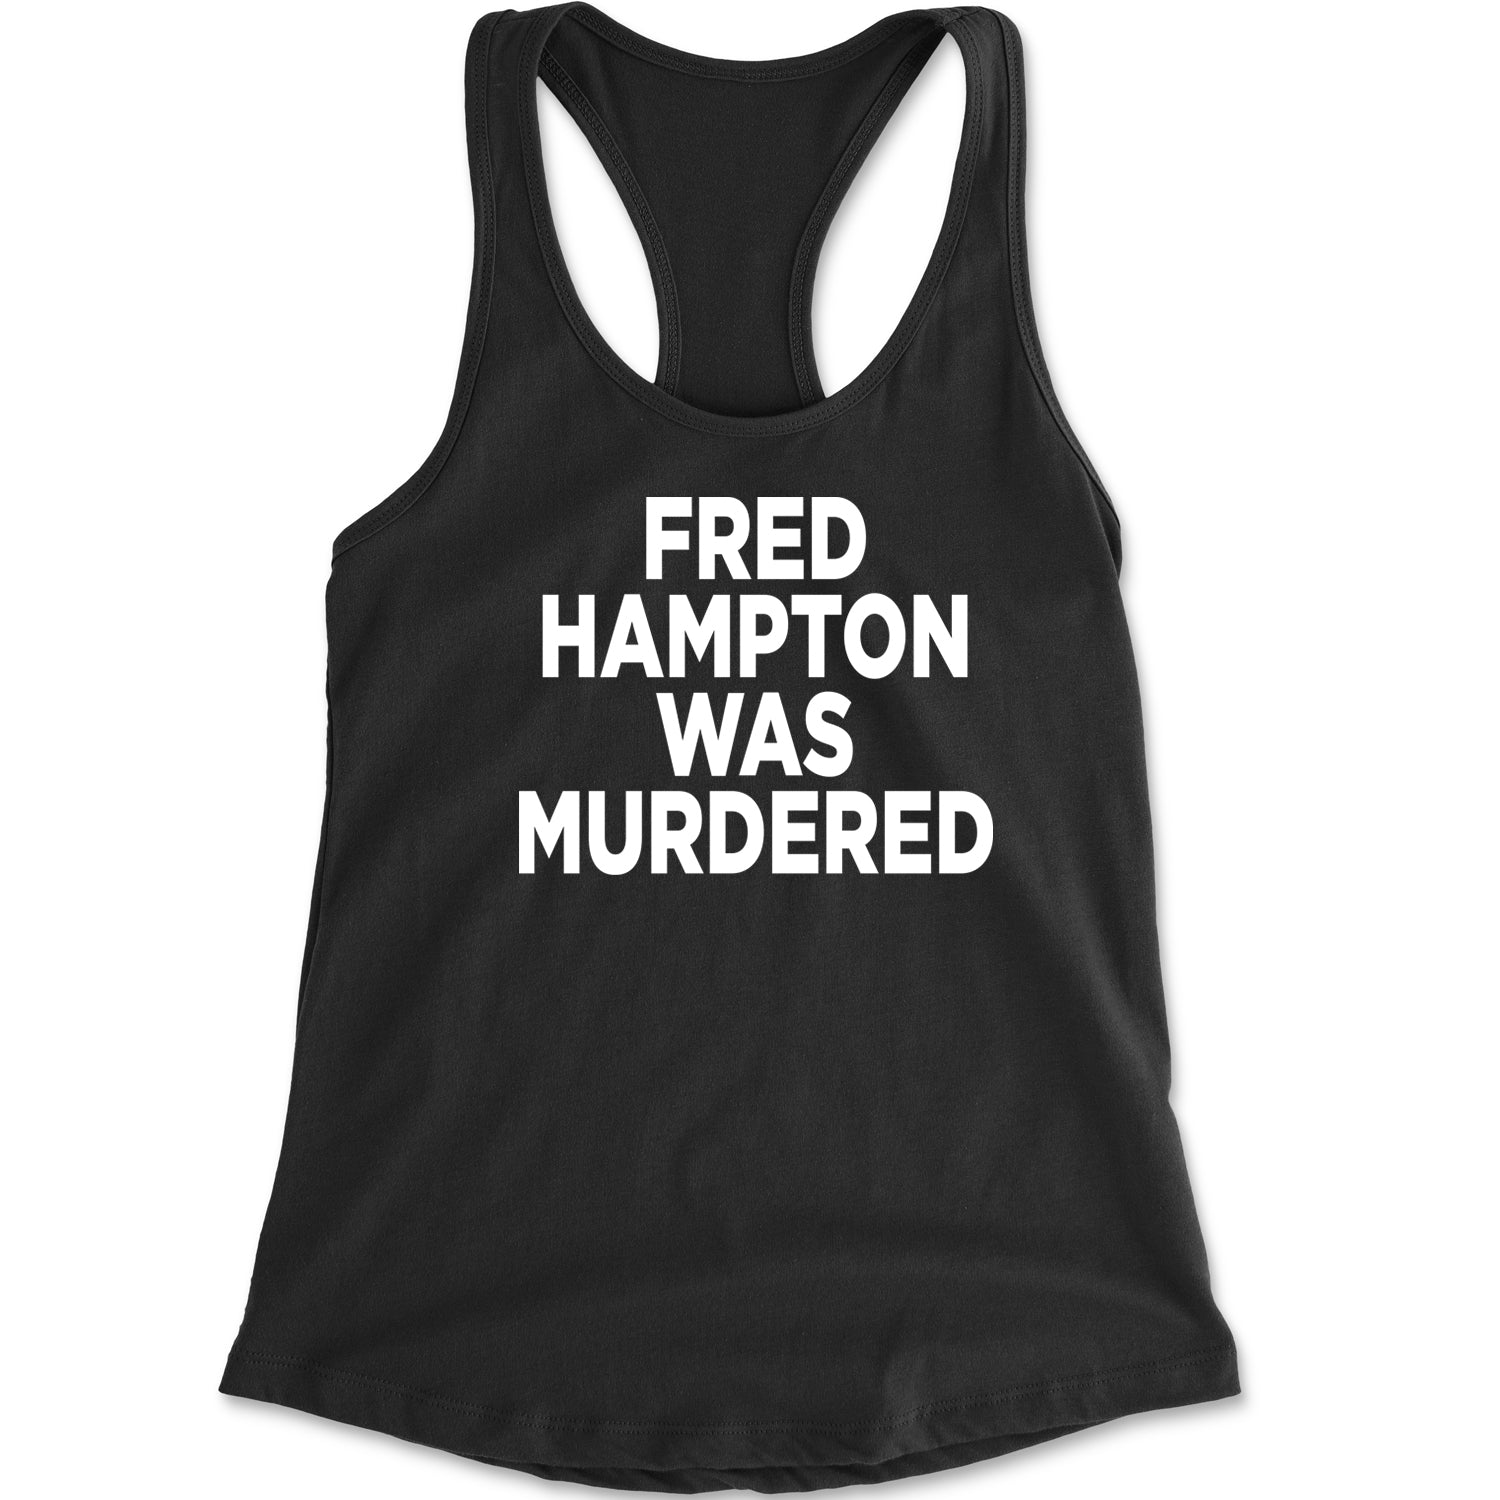 Fred Hampton Was Murdered Racerback Tank Top for Women activism, african, africanamerican, american, black, blm, brutality, eddie, lives, matter, murphy, people, police, you by Expression Tees